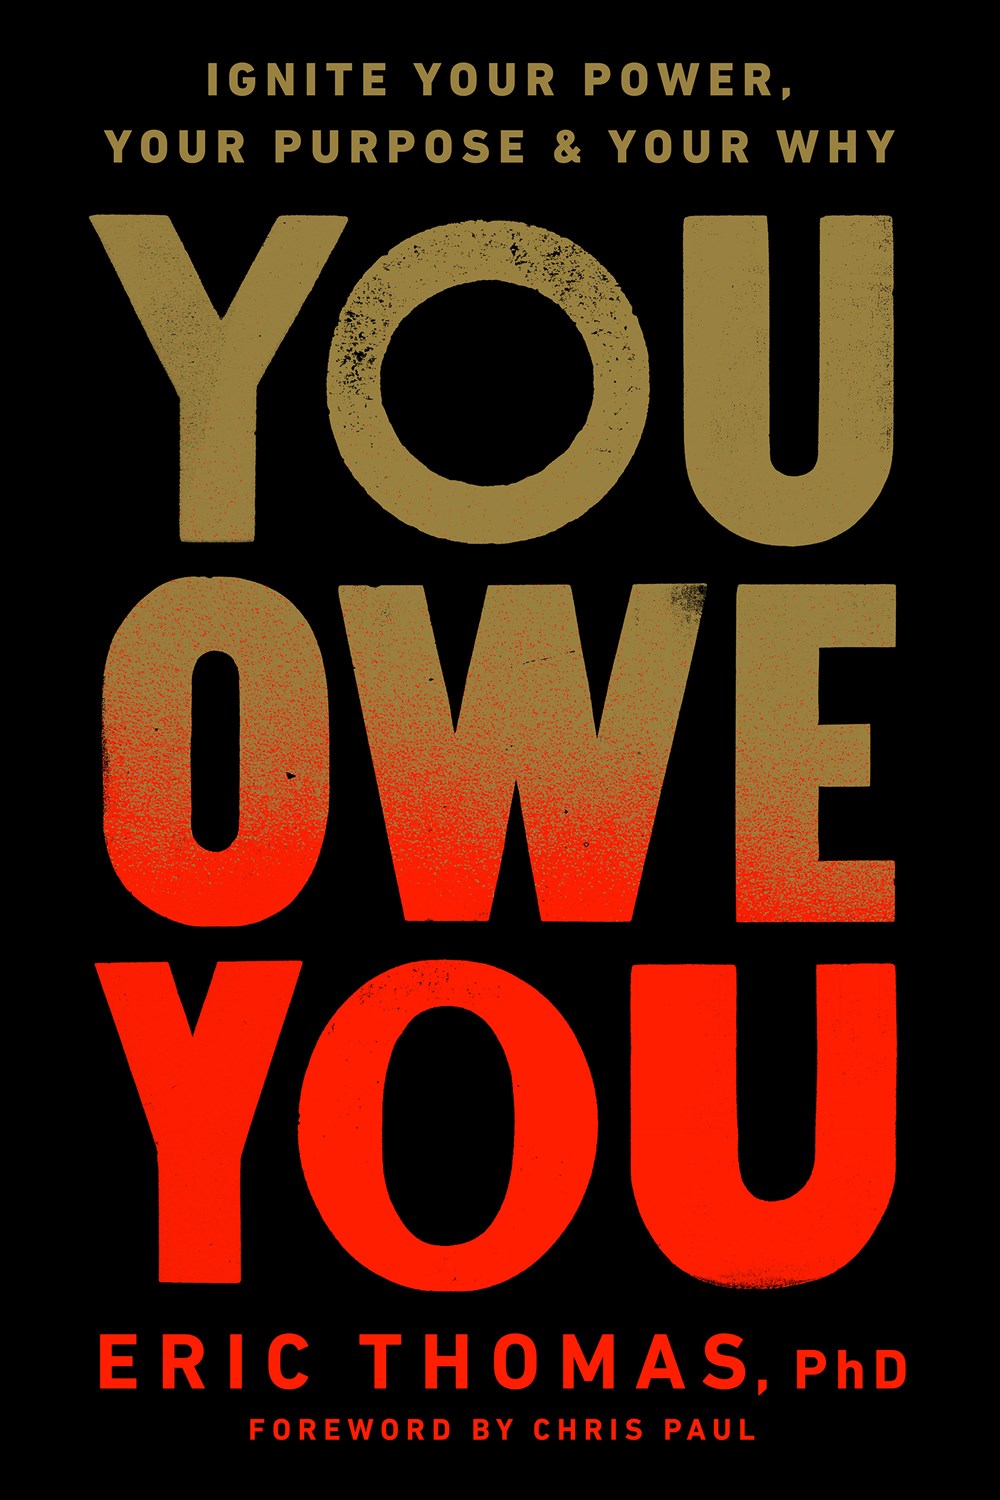 You Owe You : Ignite Your Power, Your Purpose, and Your Why by Eric Thomas, PhD